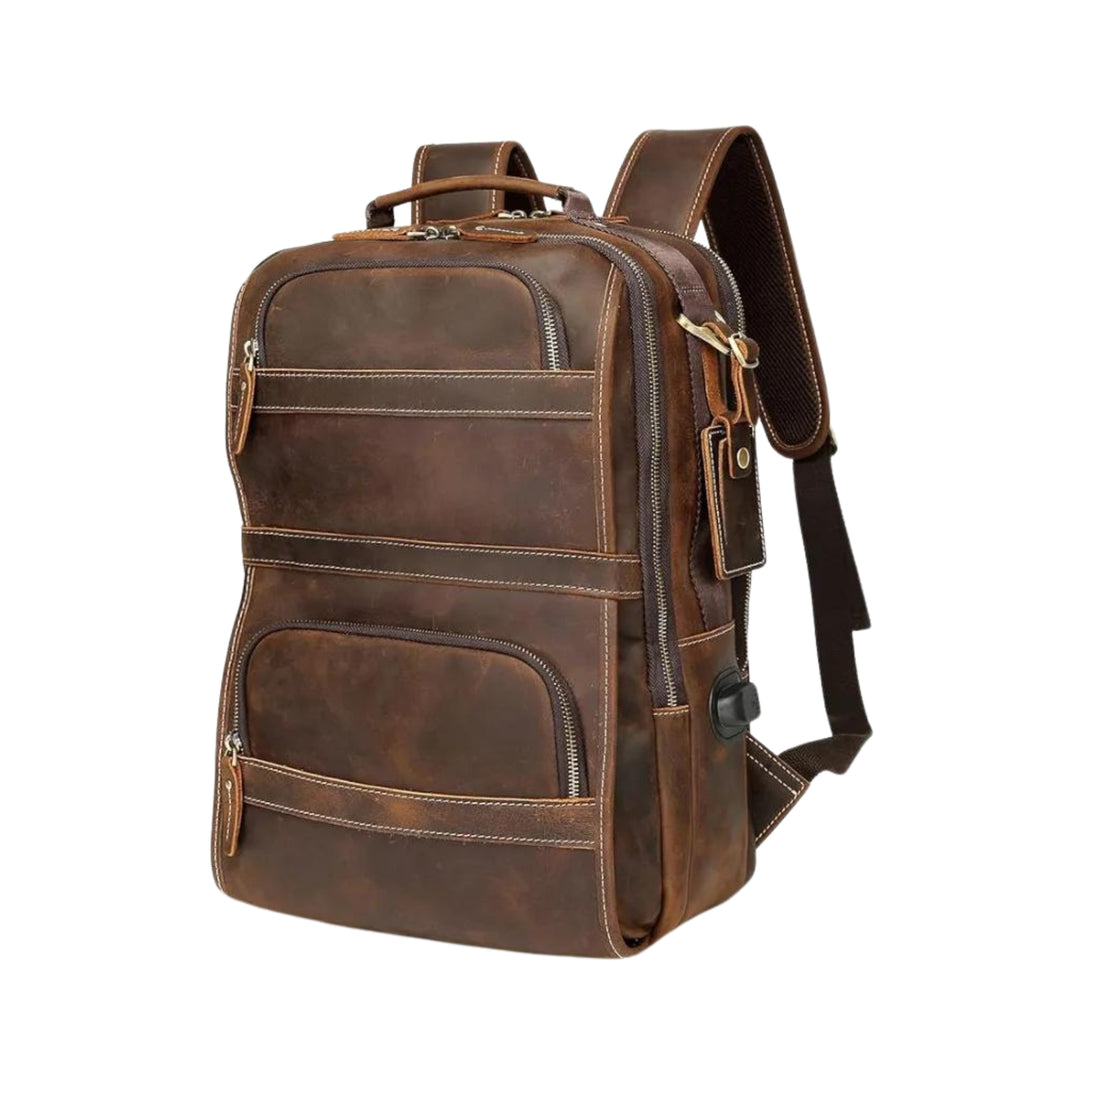 Leather Men's Backpack - Gro Limitless